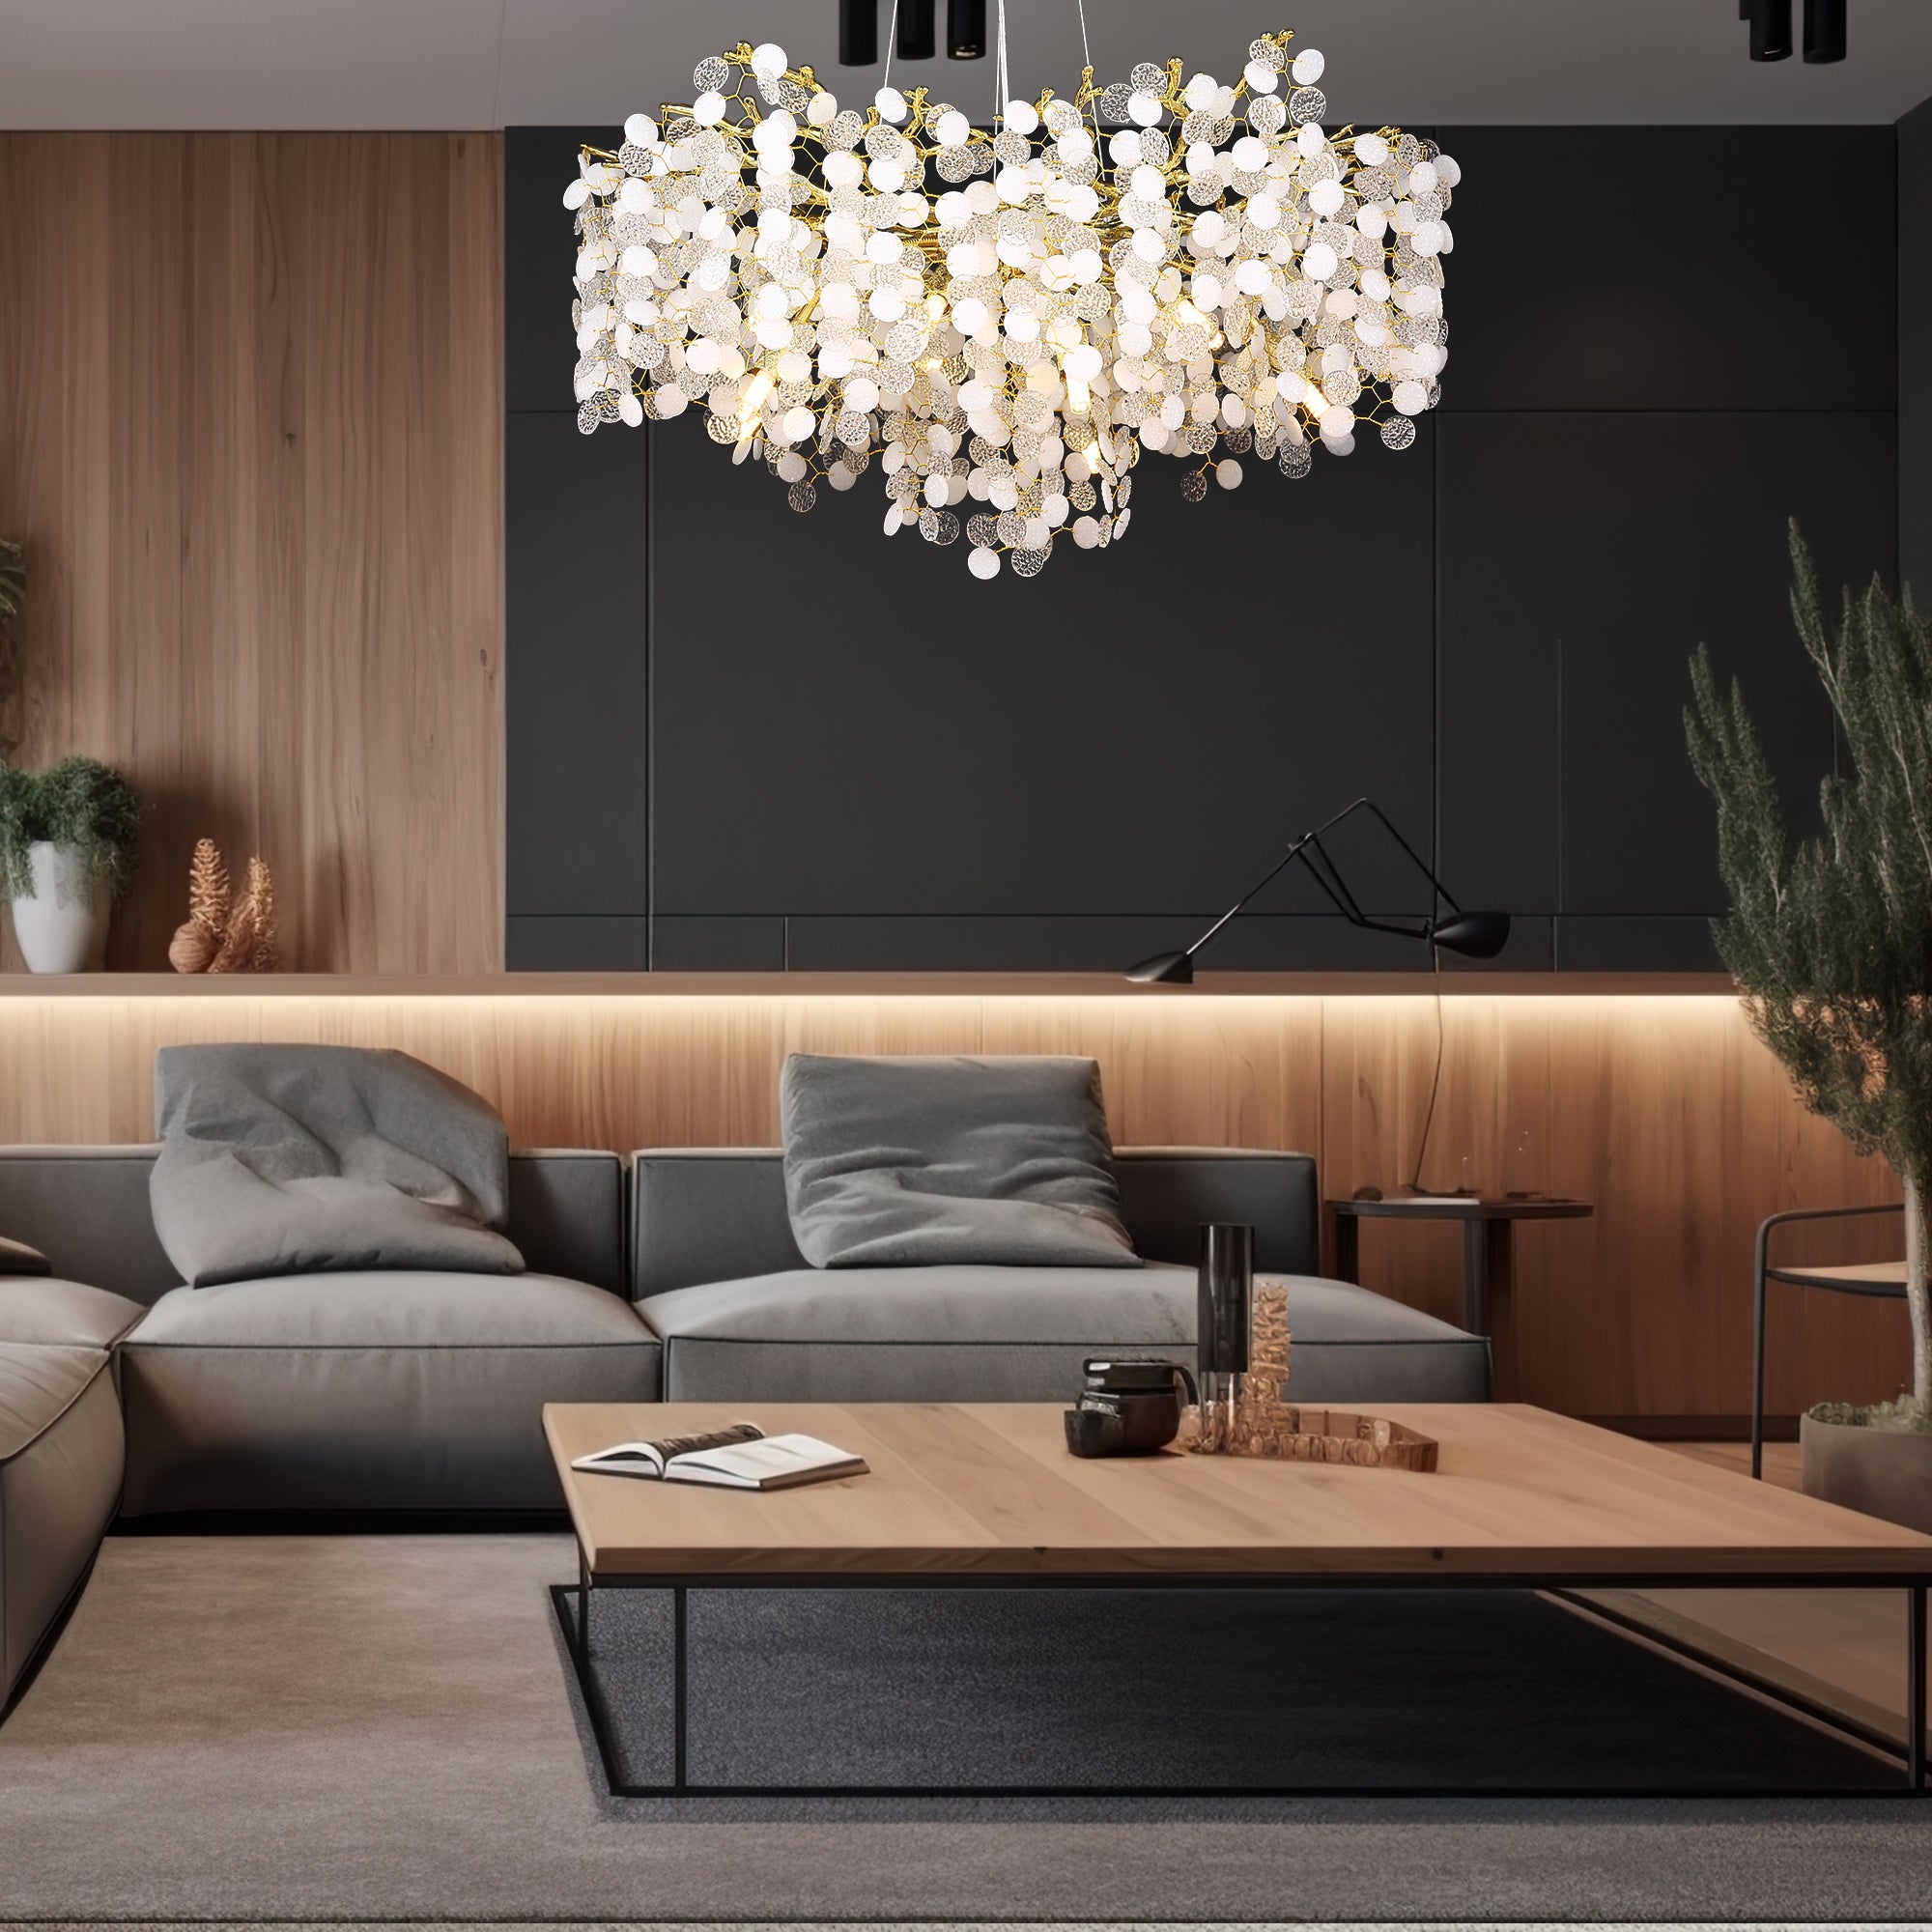 Circe Modern Clear Crystal Round Modern Branch Chandelier For Living Room